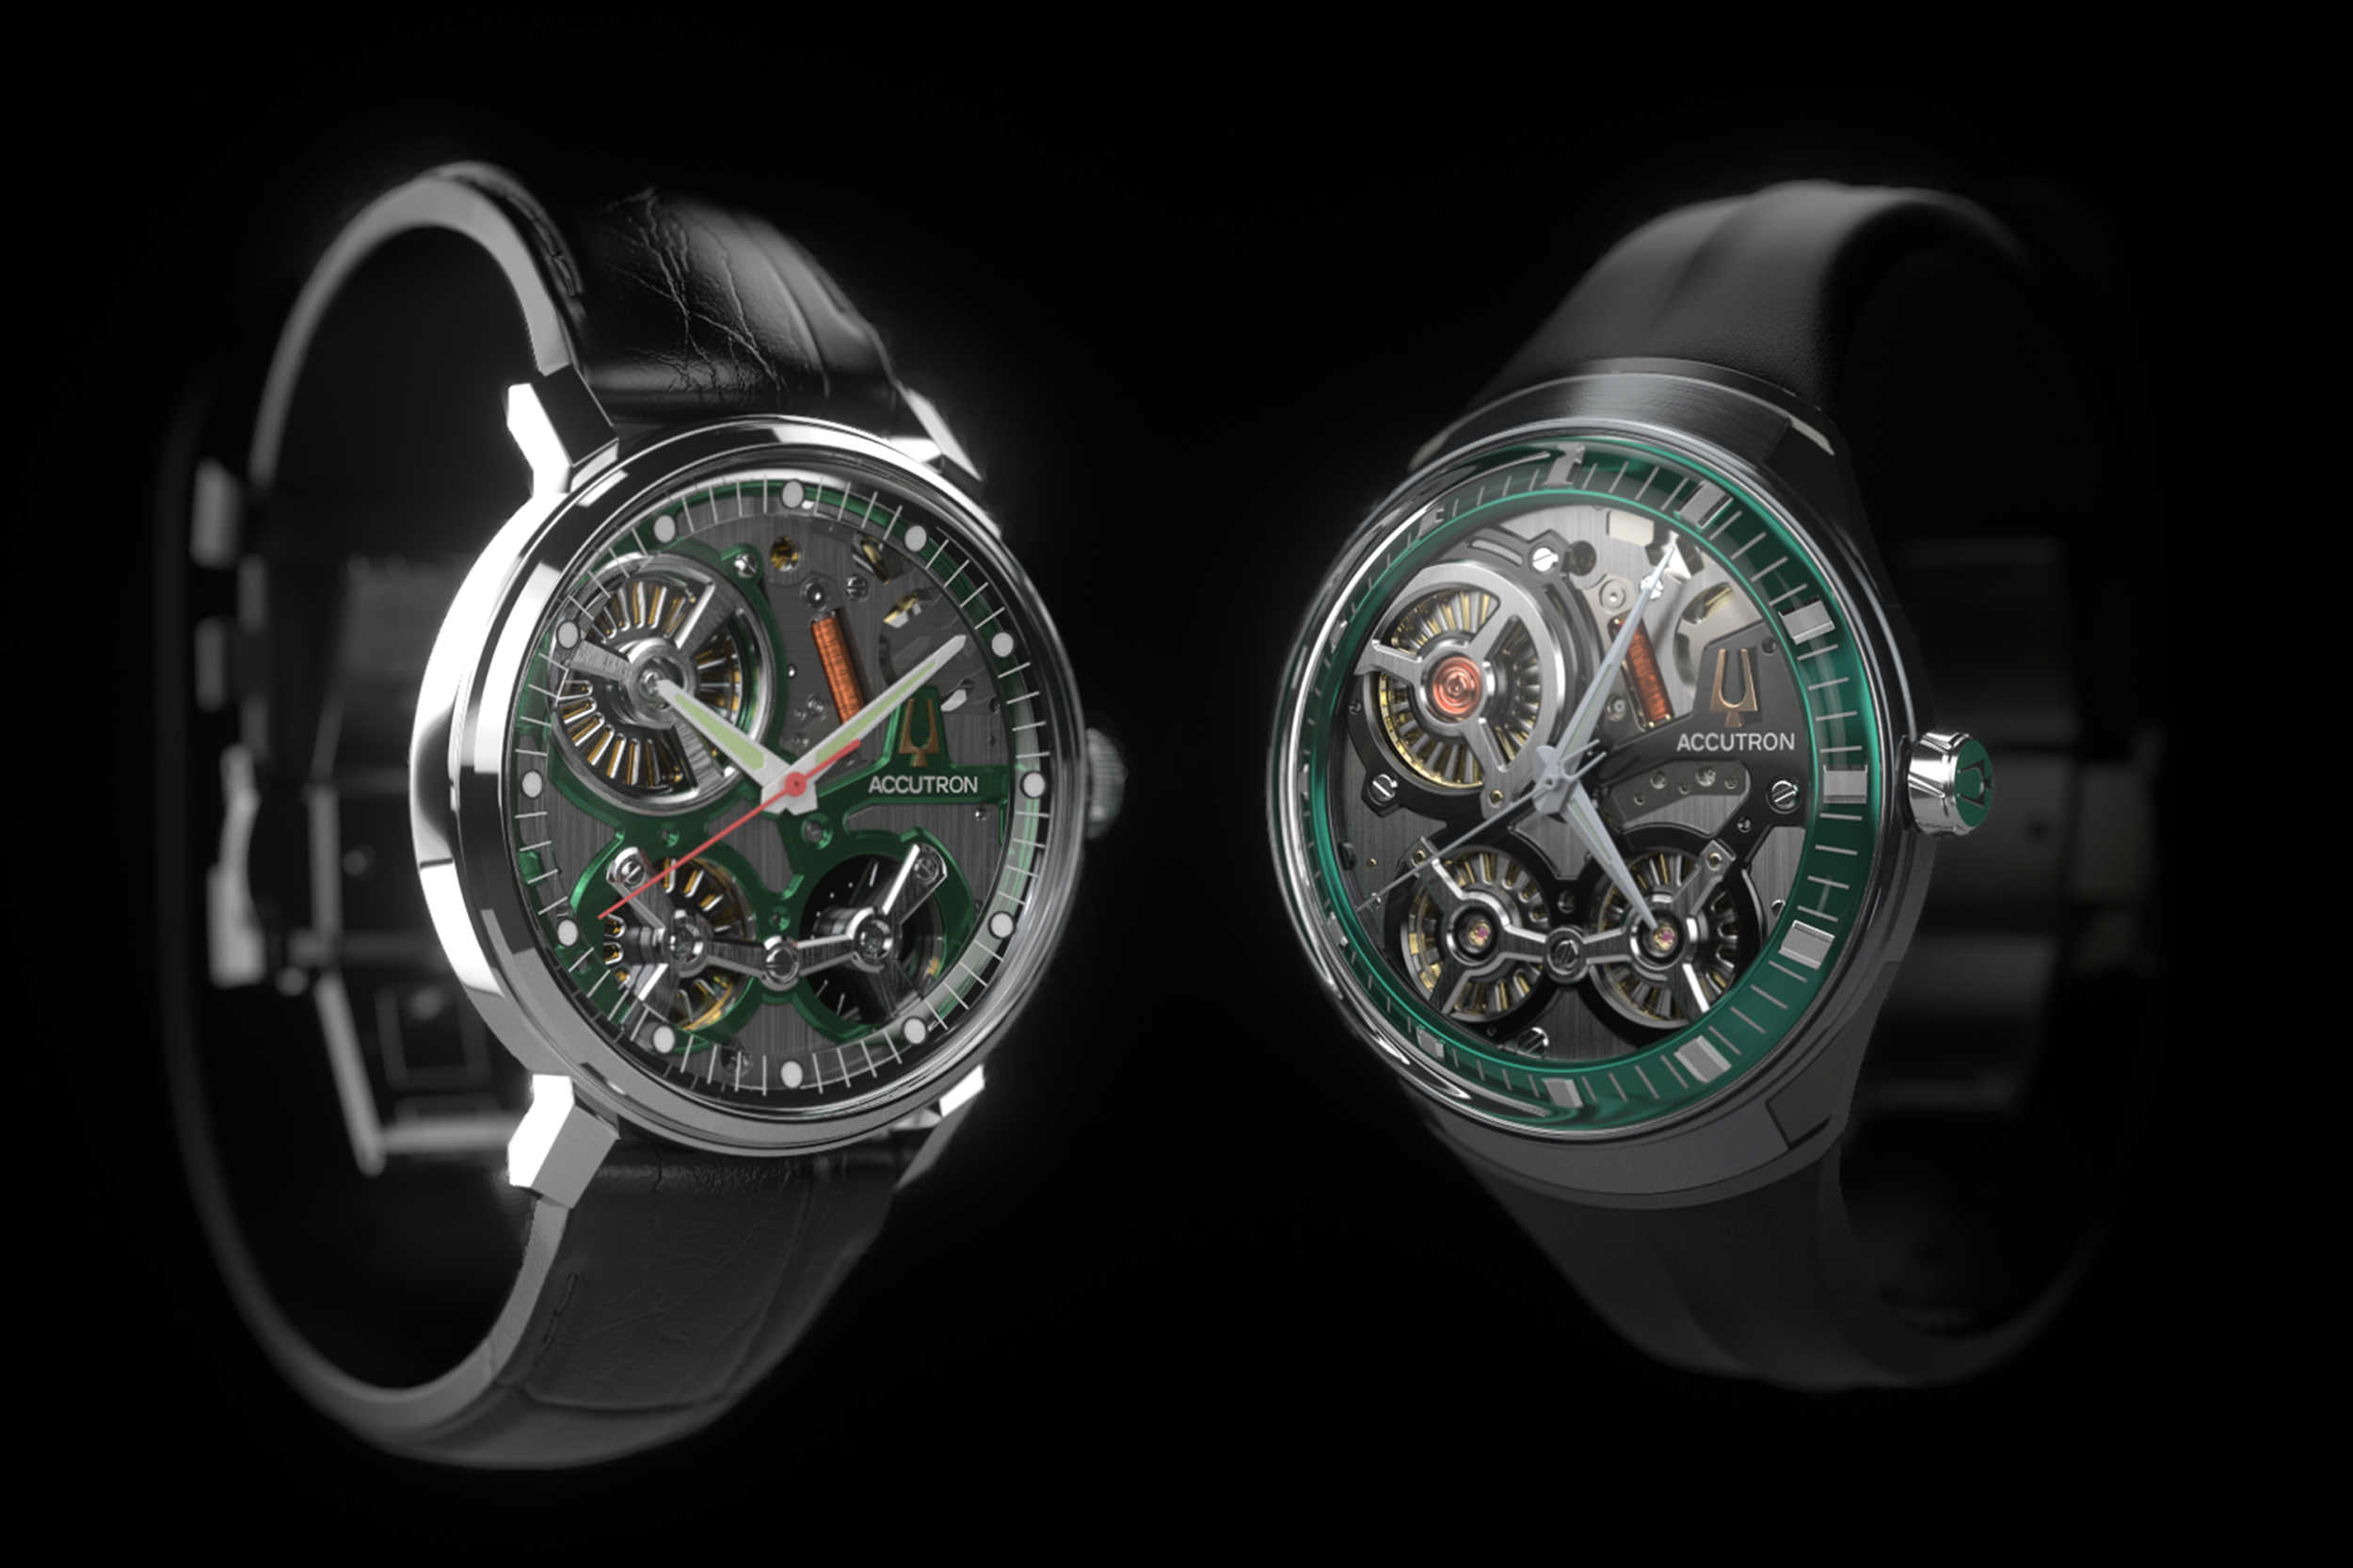 Introducing the Accutron Spaceview 2020 and the Accutron DNA: Two Watches with an All New Electrostatic Movement